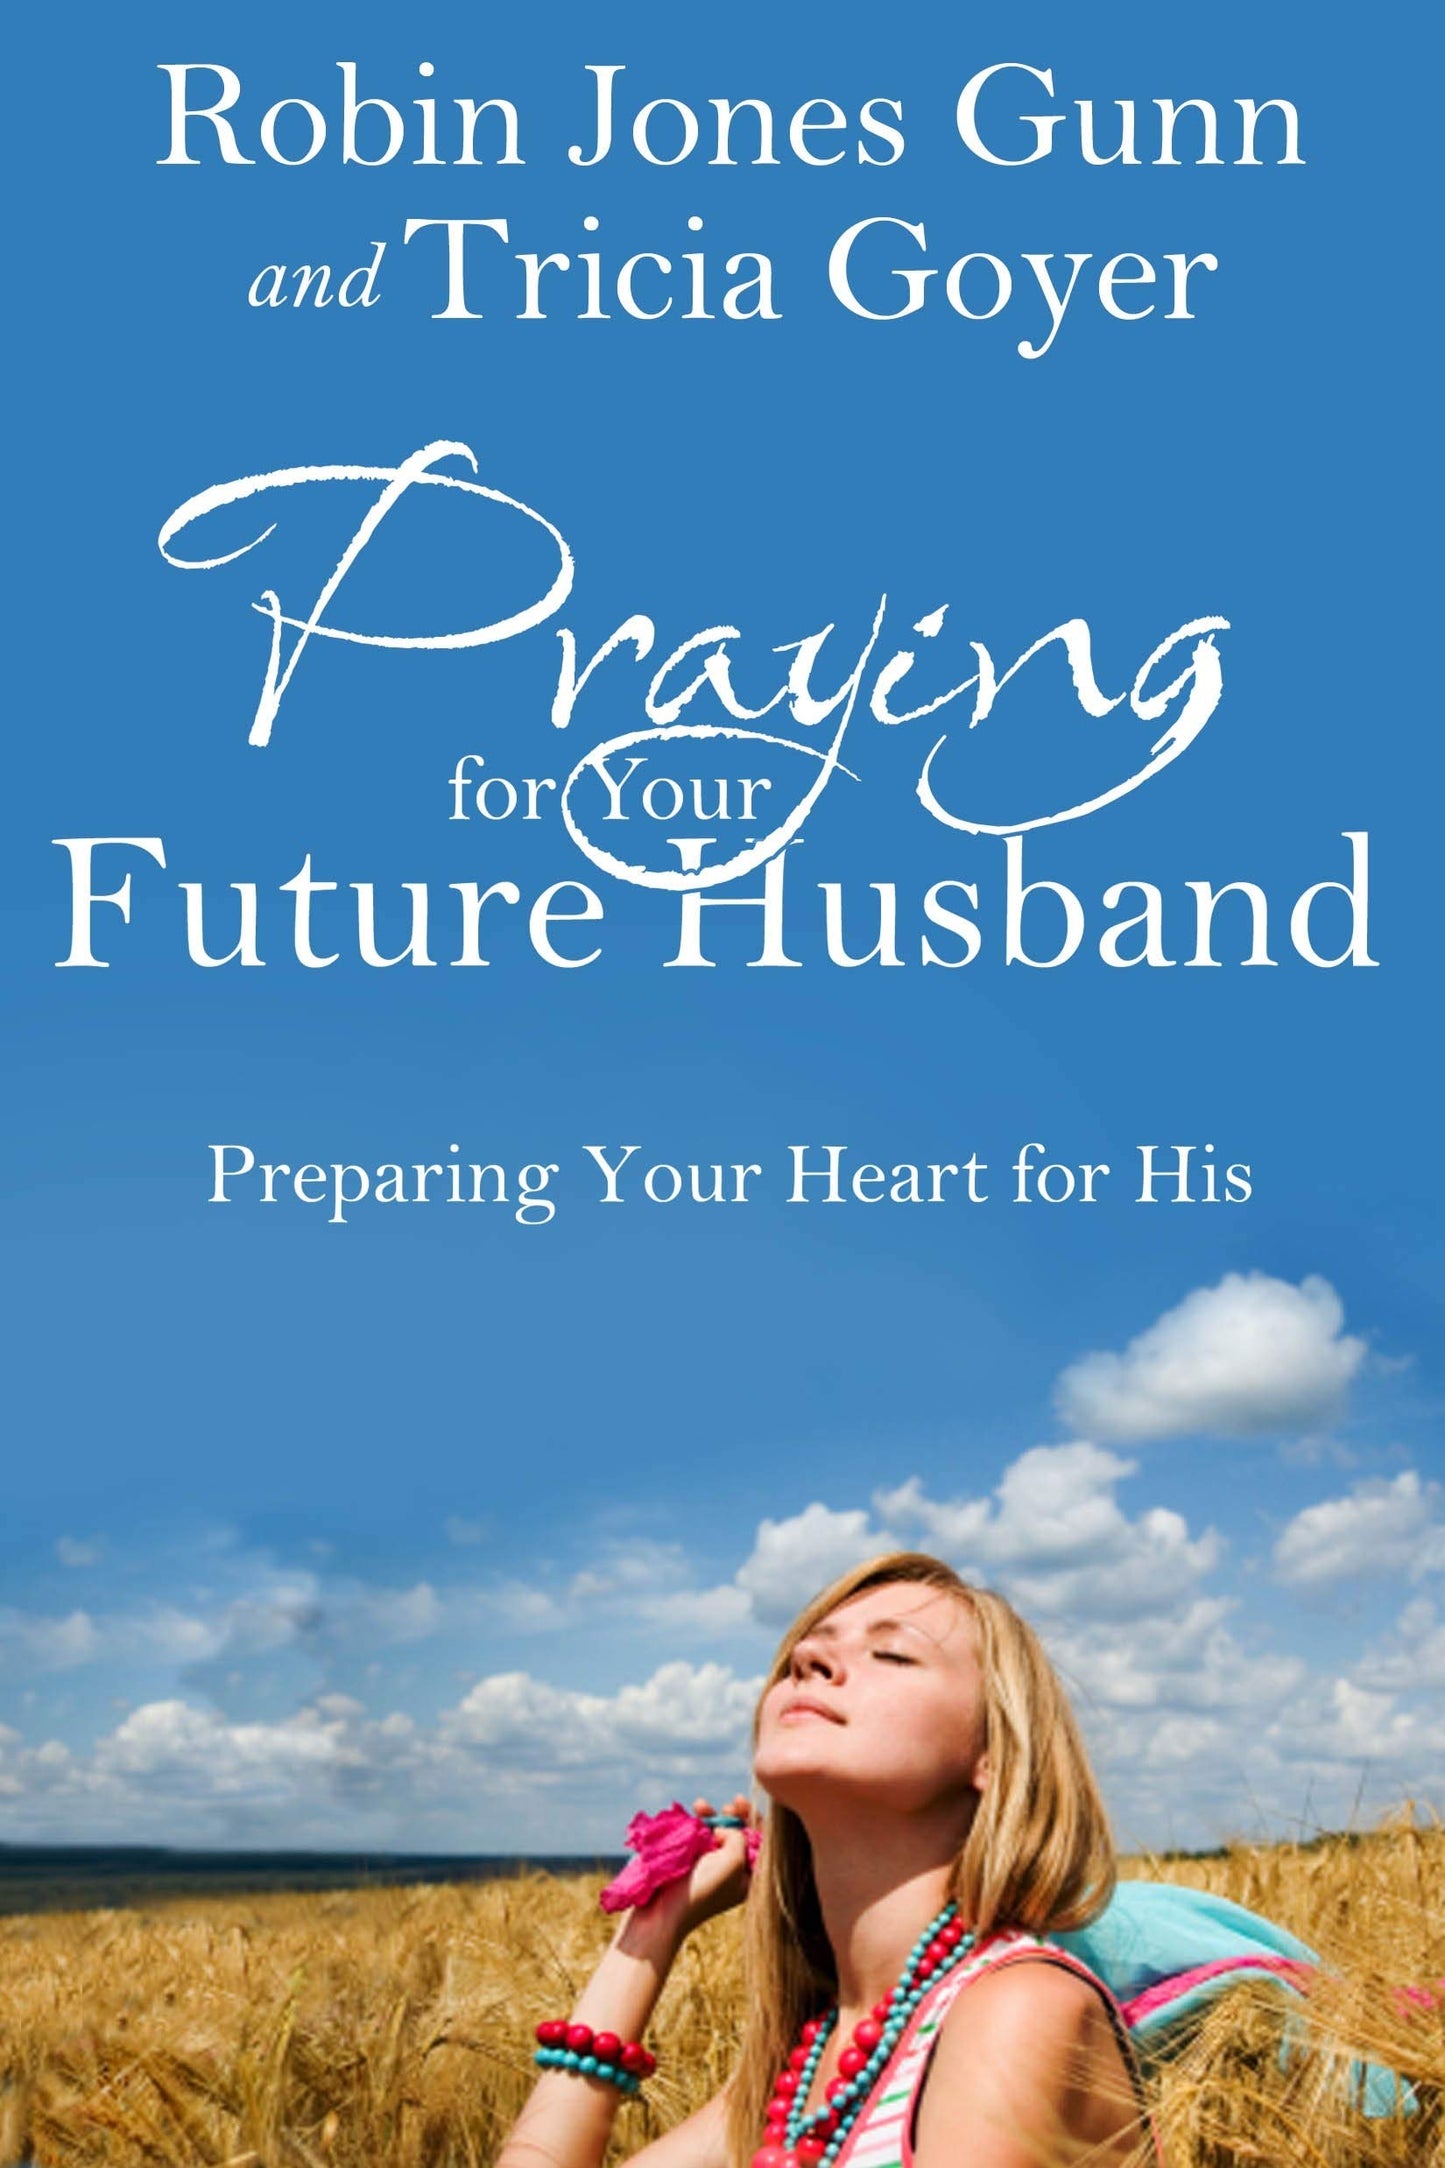 Praying for your Future Husband (5389565657248)